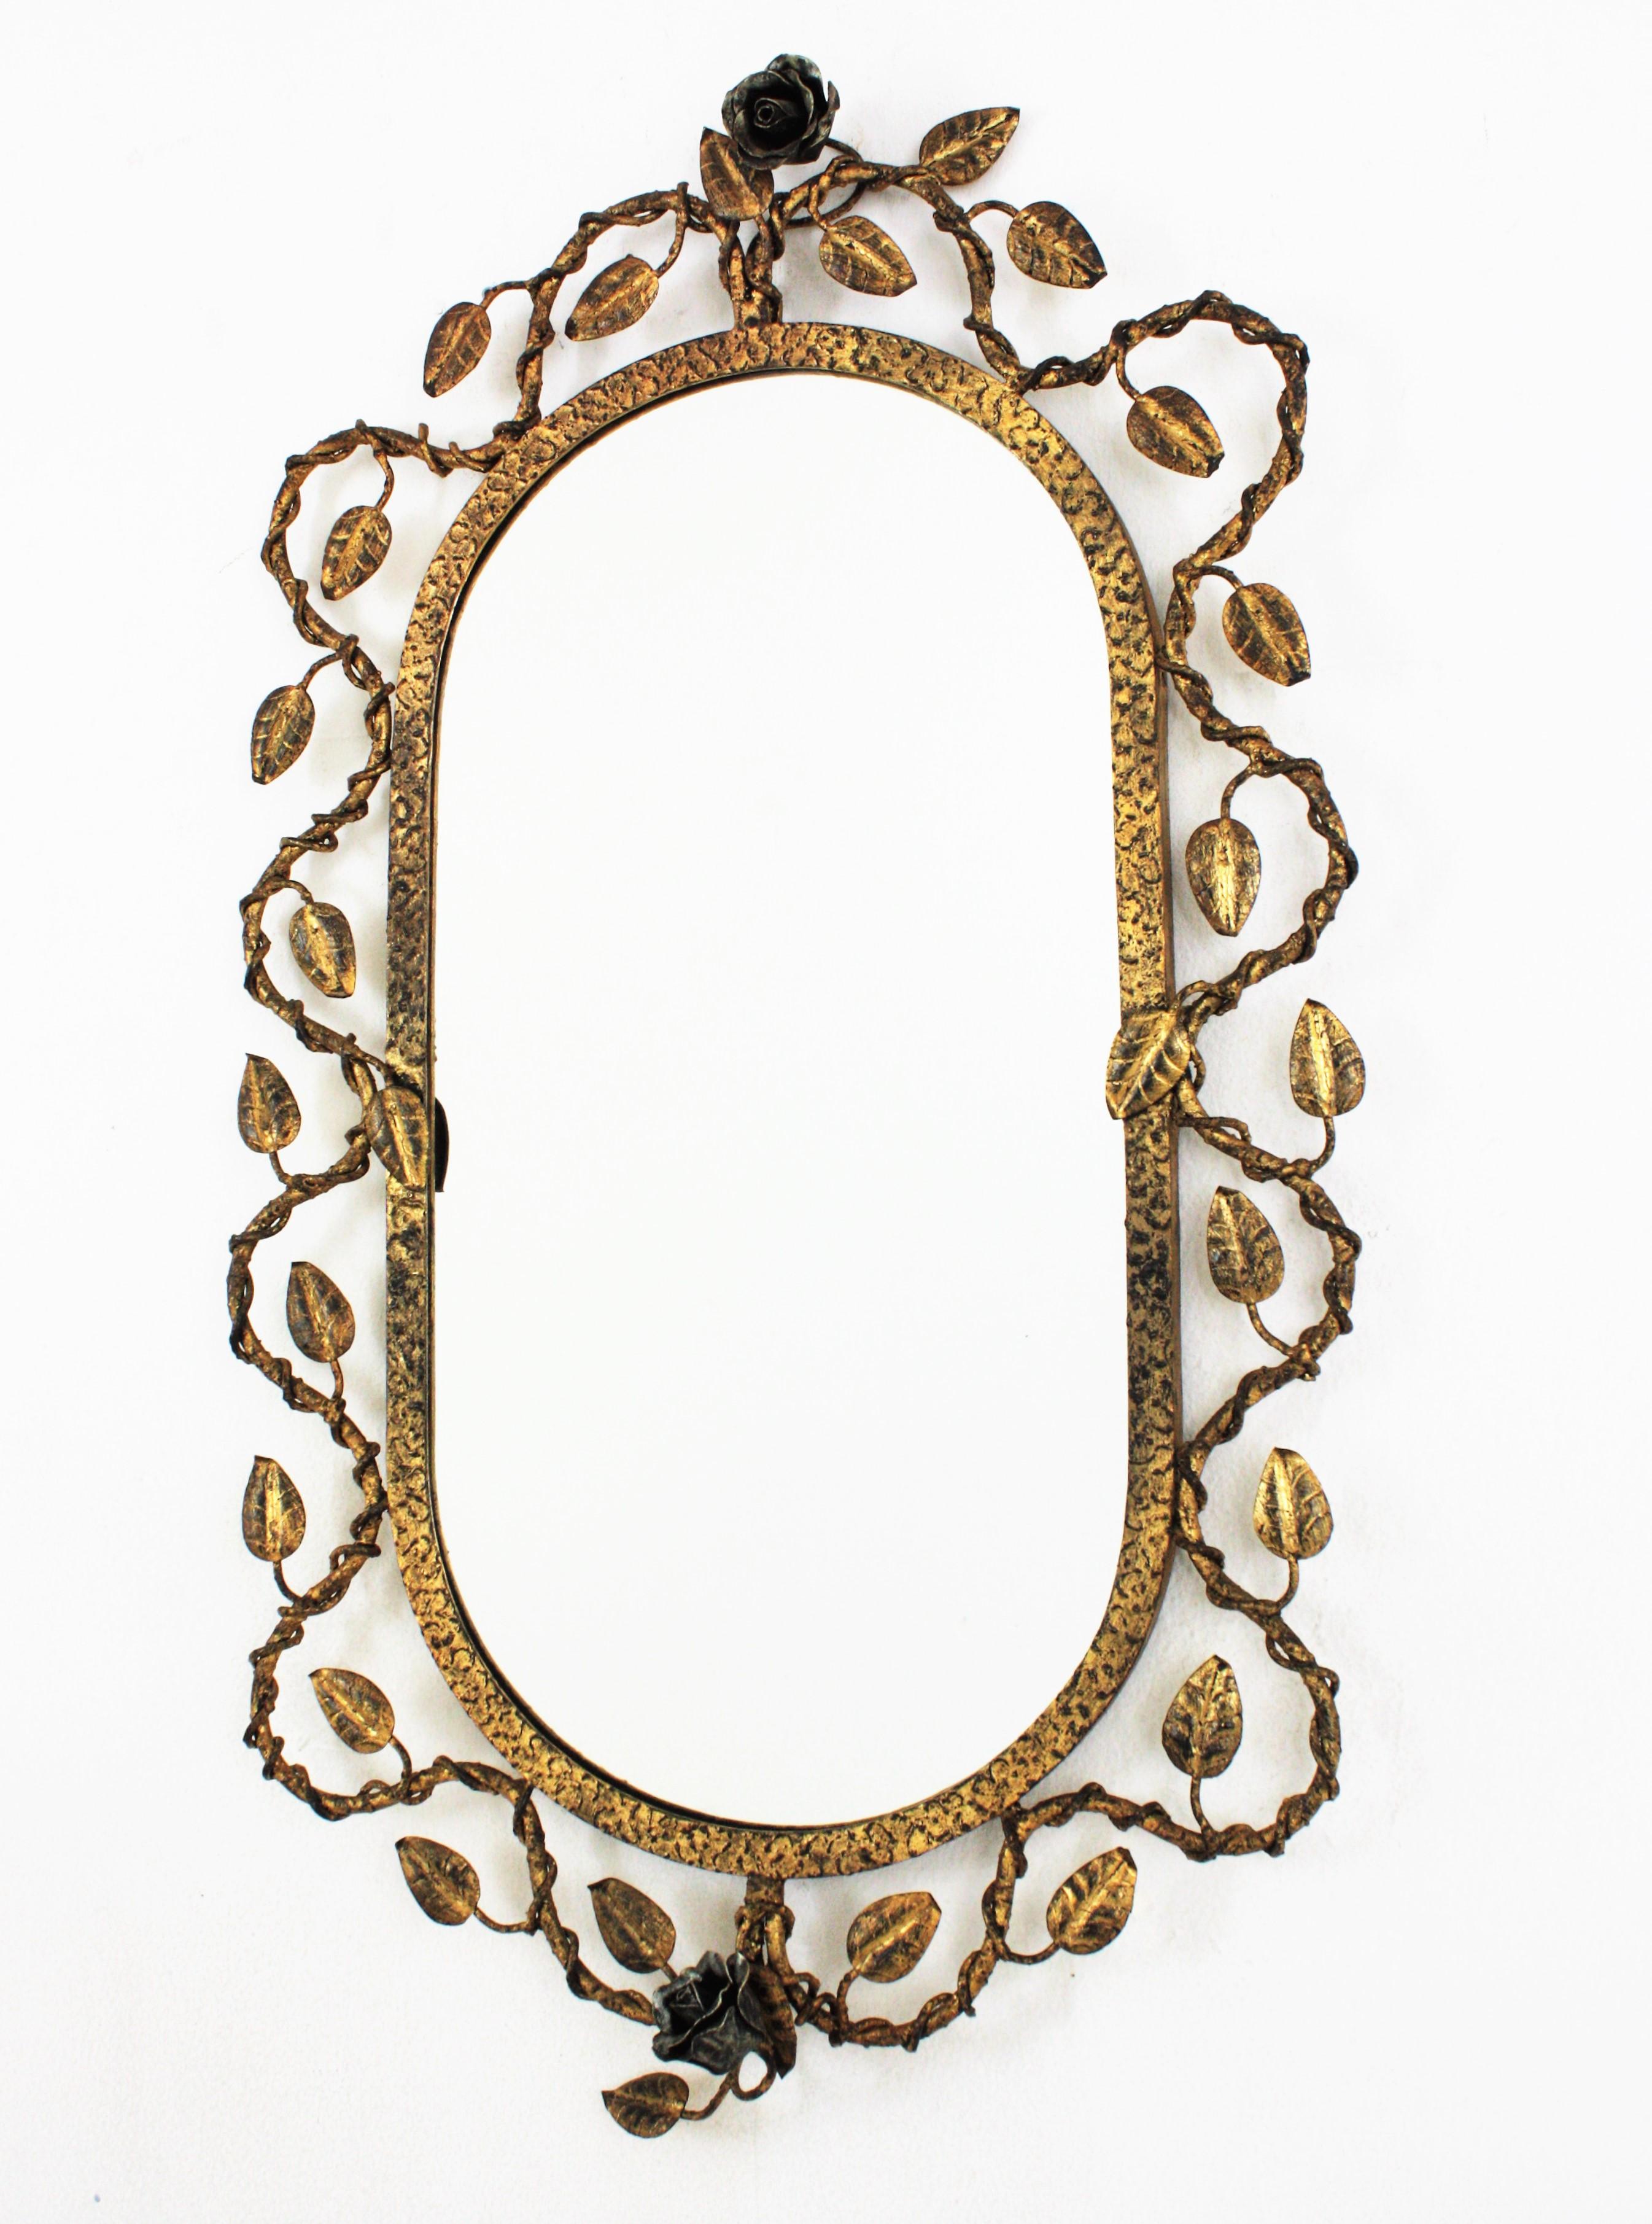 Metal Oval Mirror in Gilt Iron with Foliage Floral Motifs